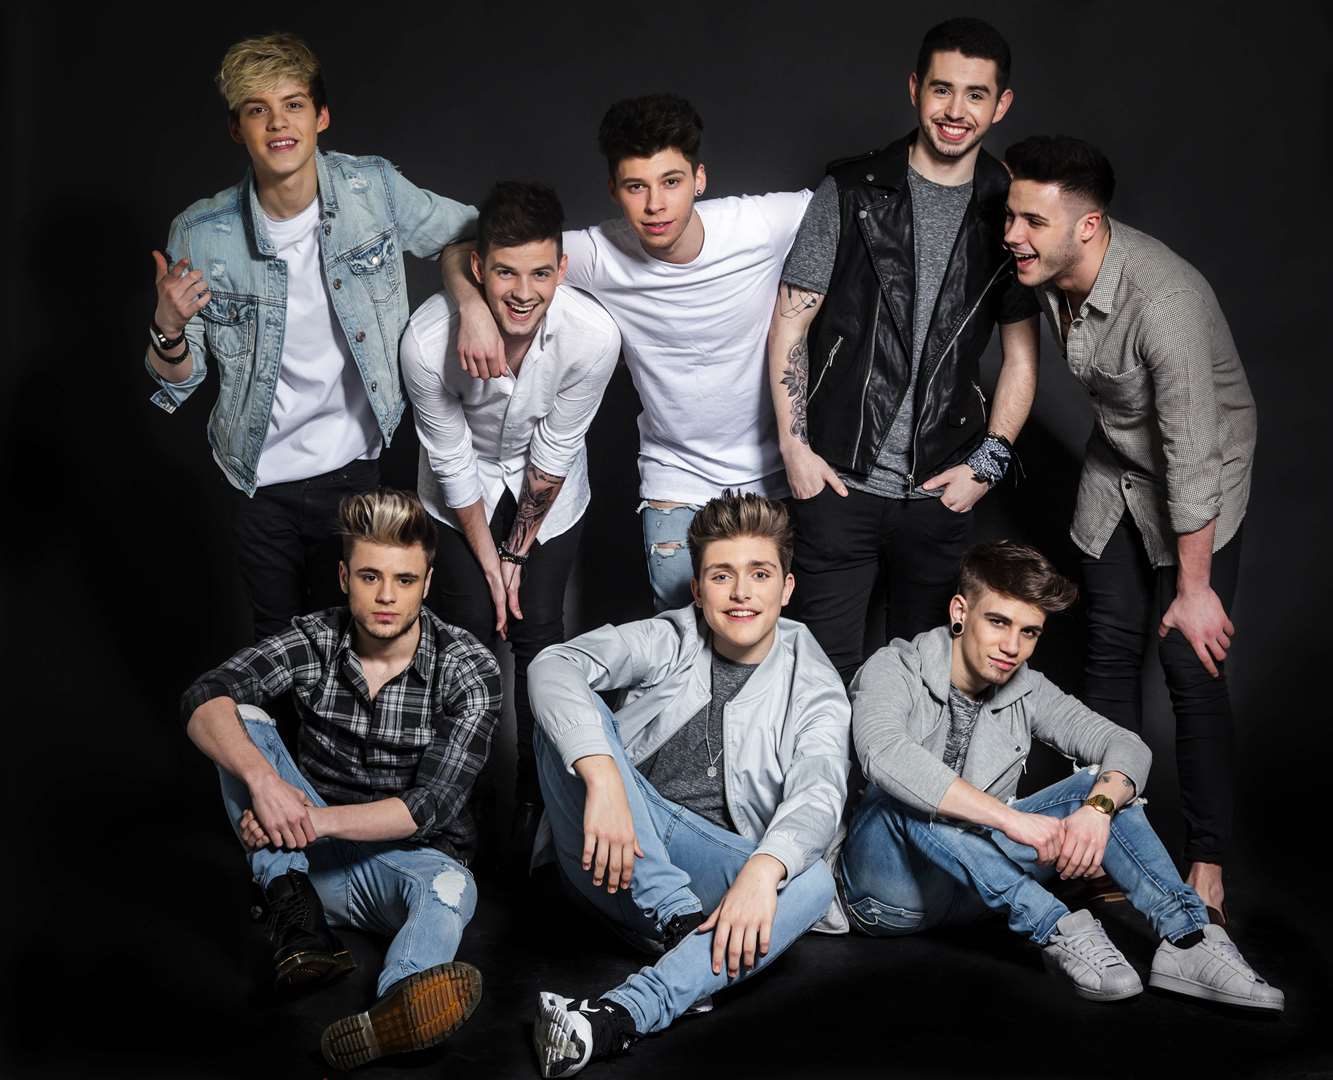 Stereo Kicks were forced to split after finding being unsigned too tough